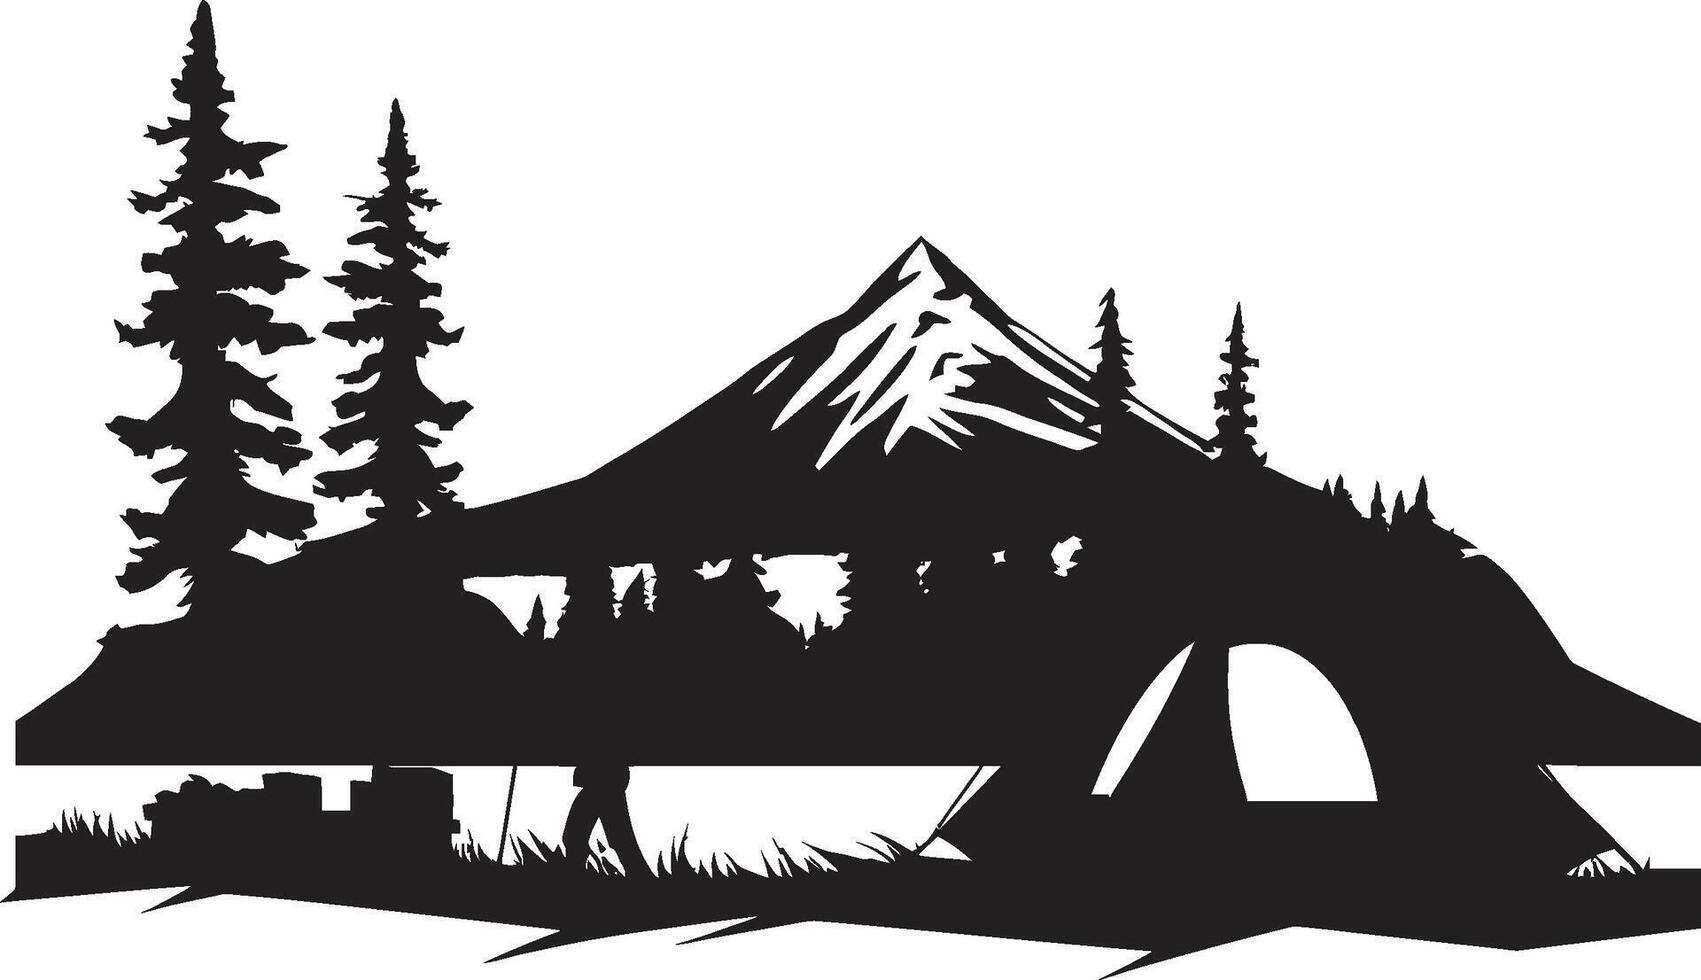 Adventure Awaits Monochrome Emblem for Outdoor Exploration Natures Symphony Chic Camping Logo Design in Black vector